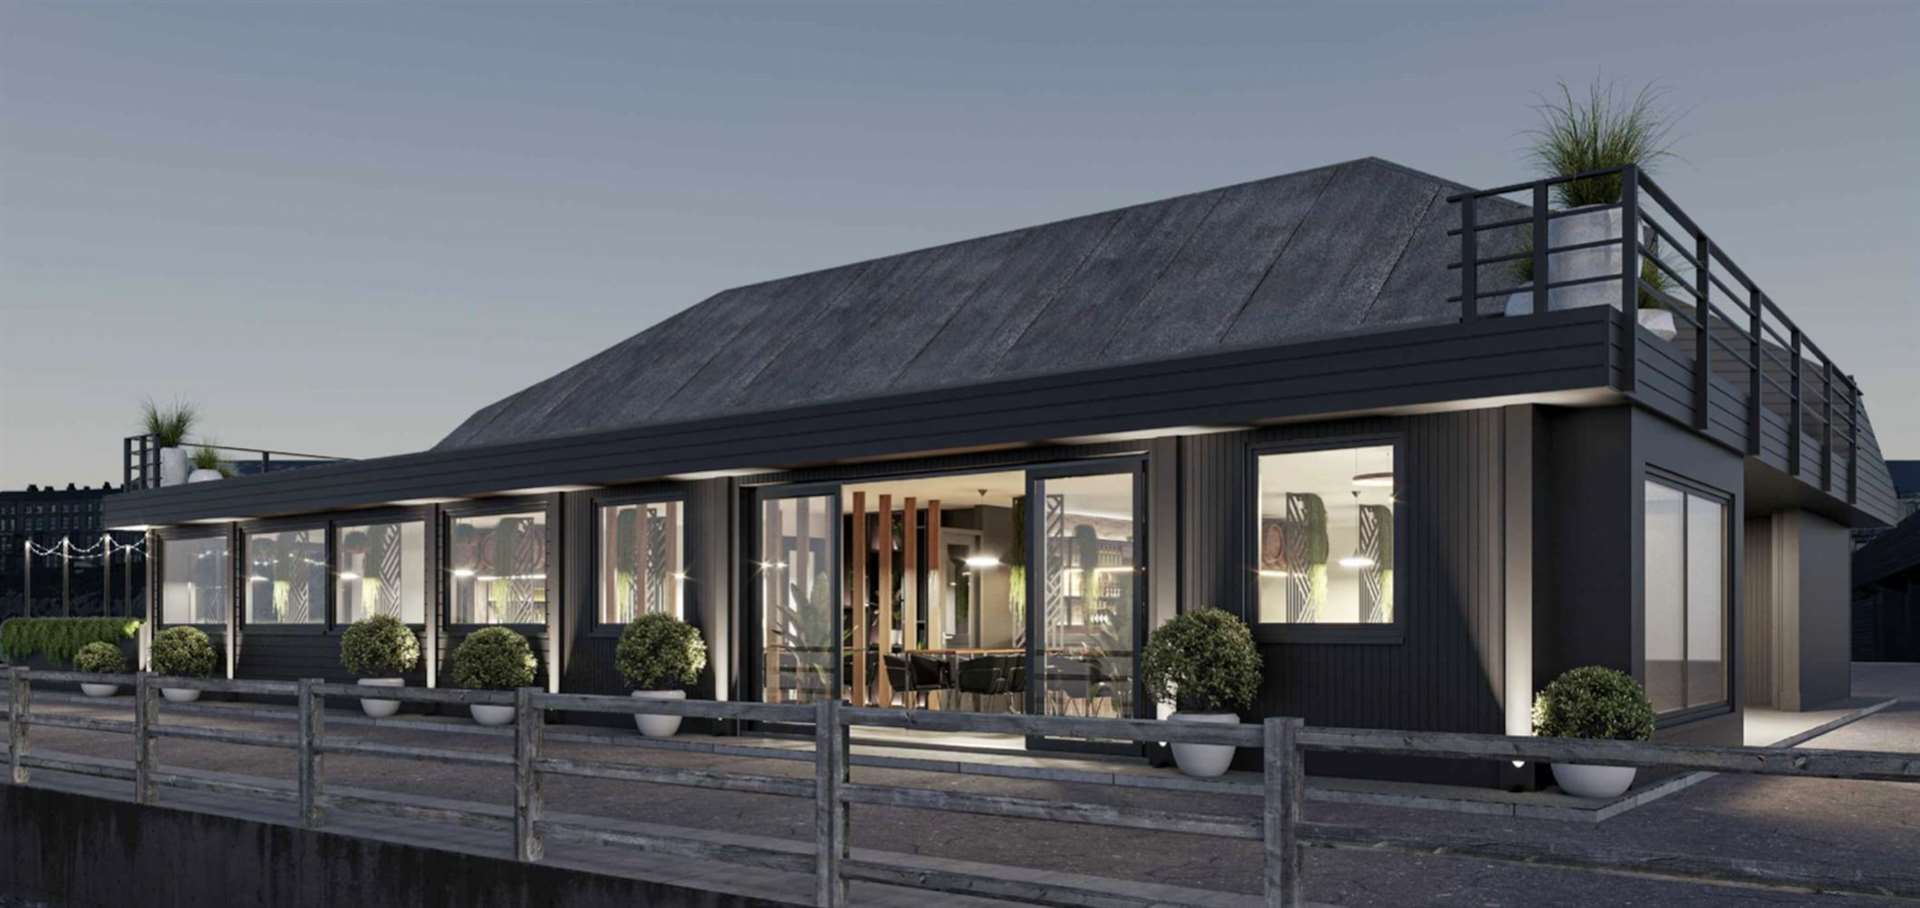 The proposed extension of Jetty Broadstairs would see it add a wine and coffee bar